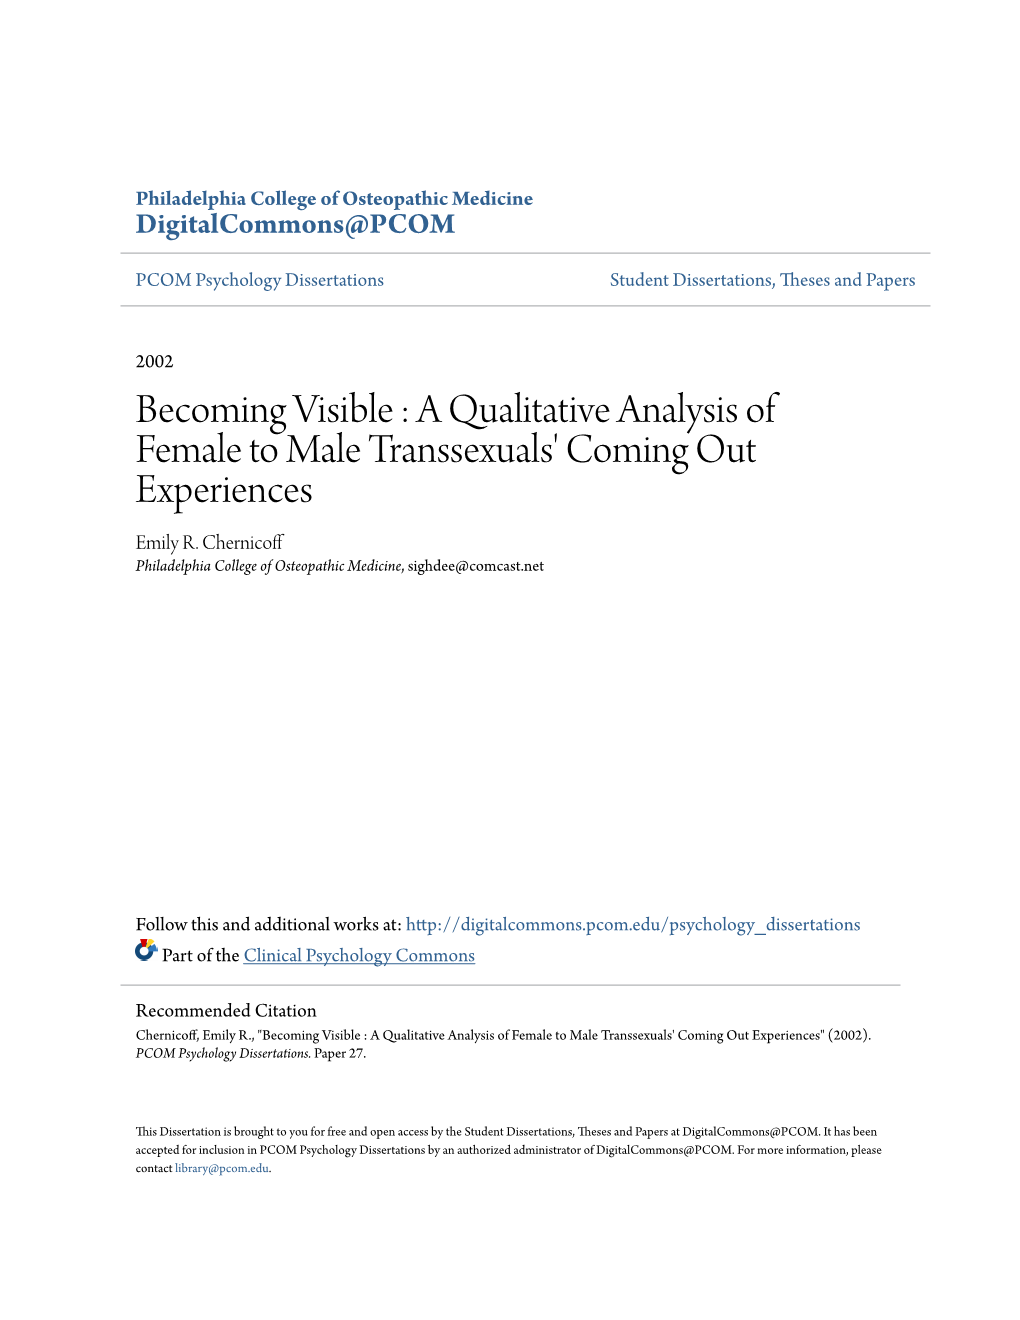 A Qualitative Analysis of Female to Male Transsexuals' Coming out Experiences Emily R